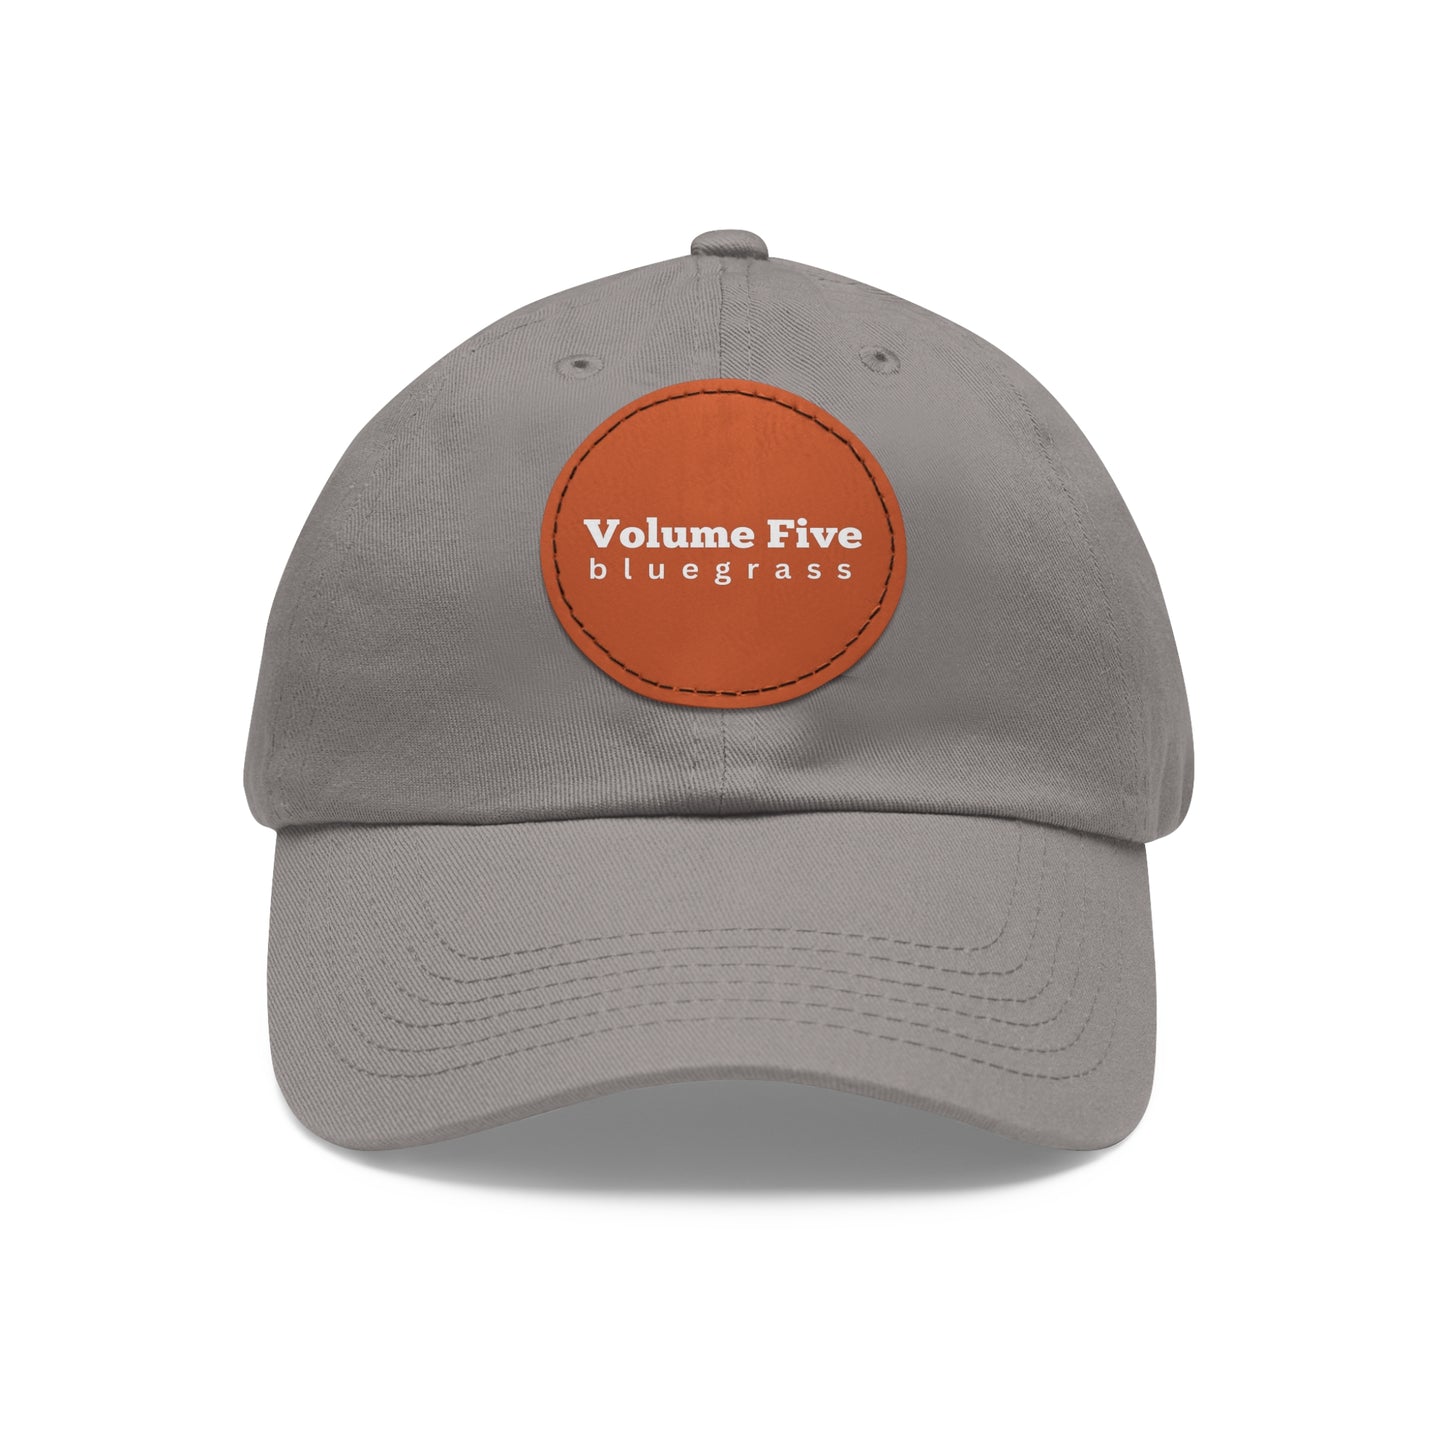 Volume Five Bluegrass Band Hat with Leather Patch (Round)